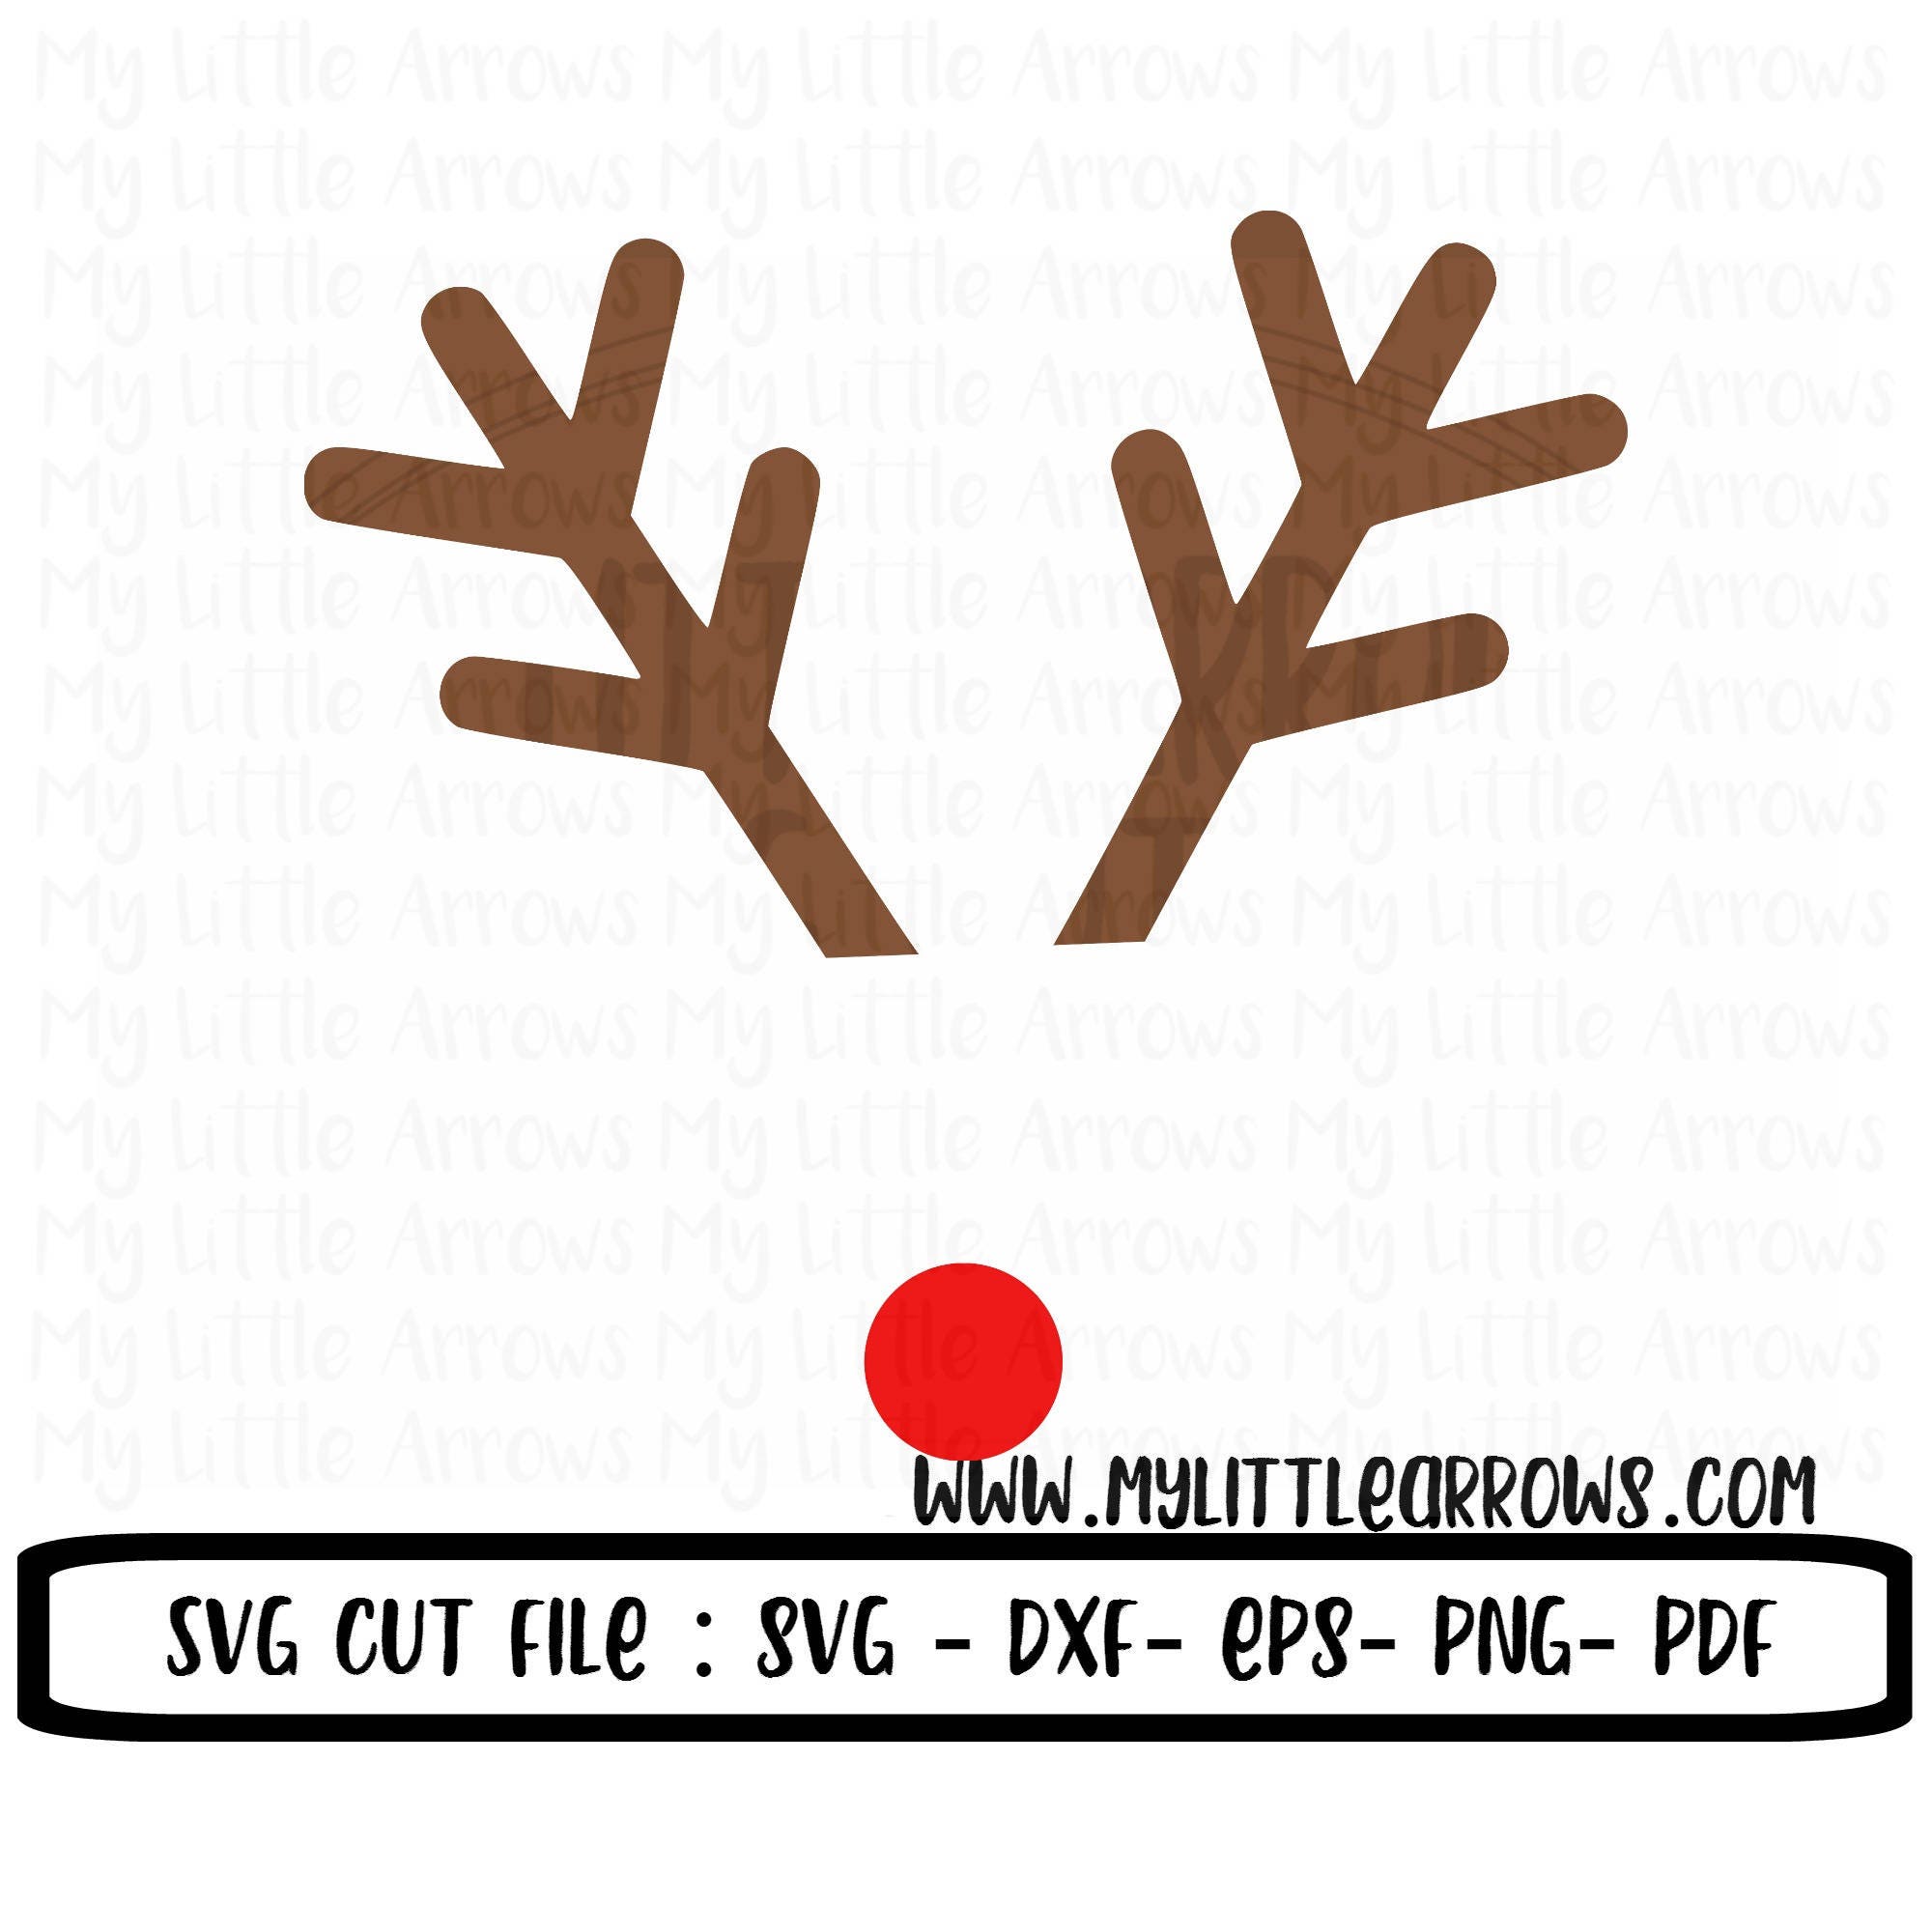 Download Reindeerears And Antlers Cute Svg Free - Layered SVG Cut ...